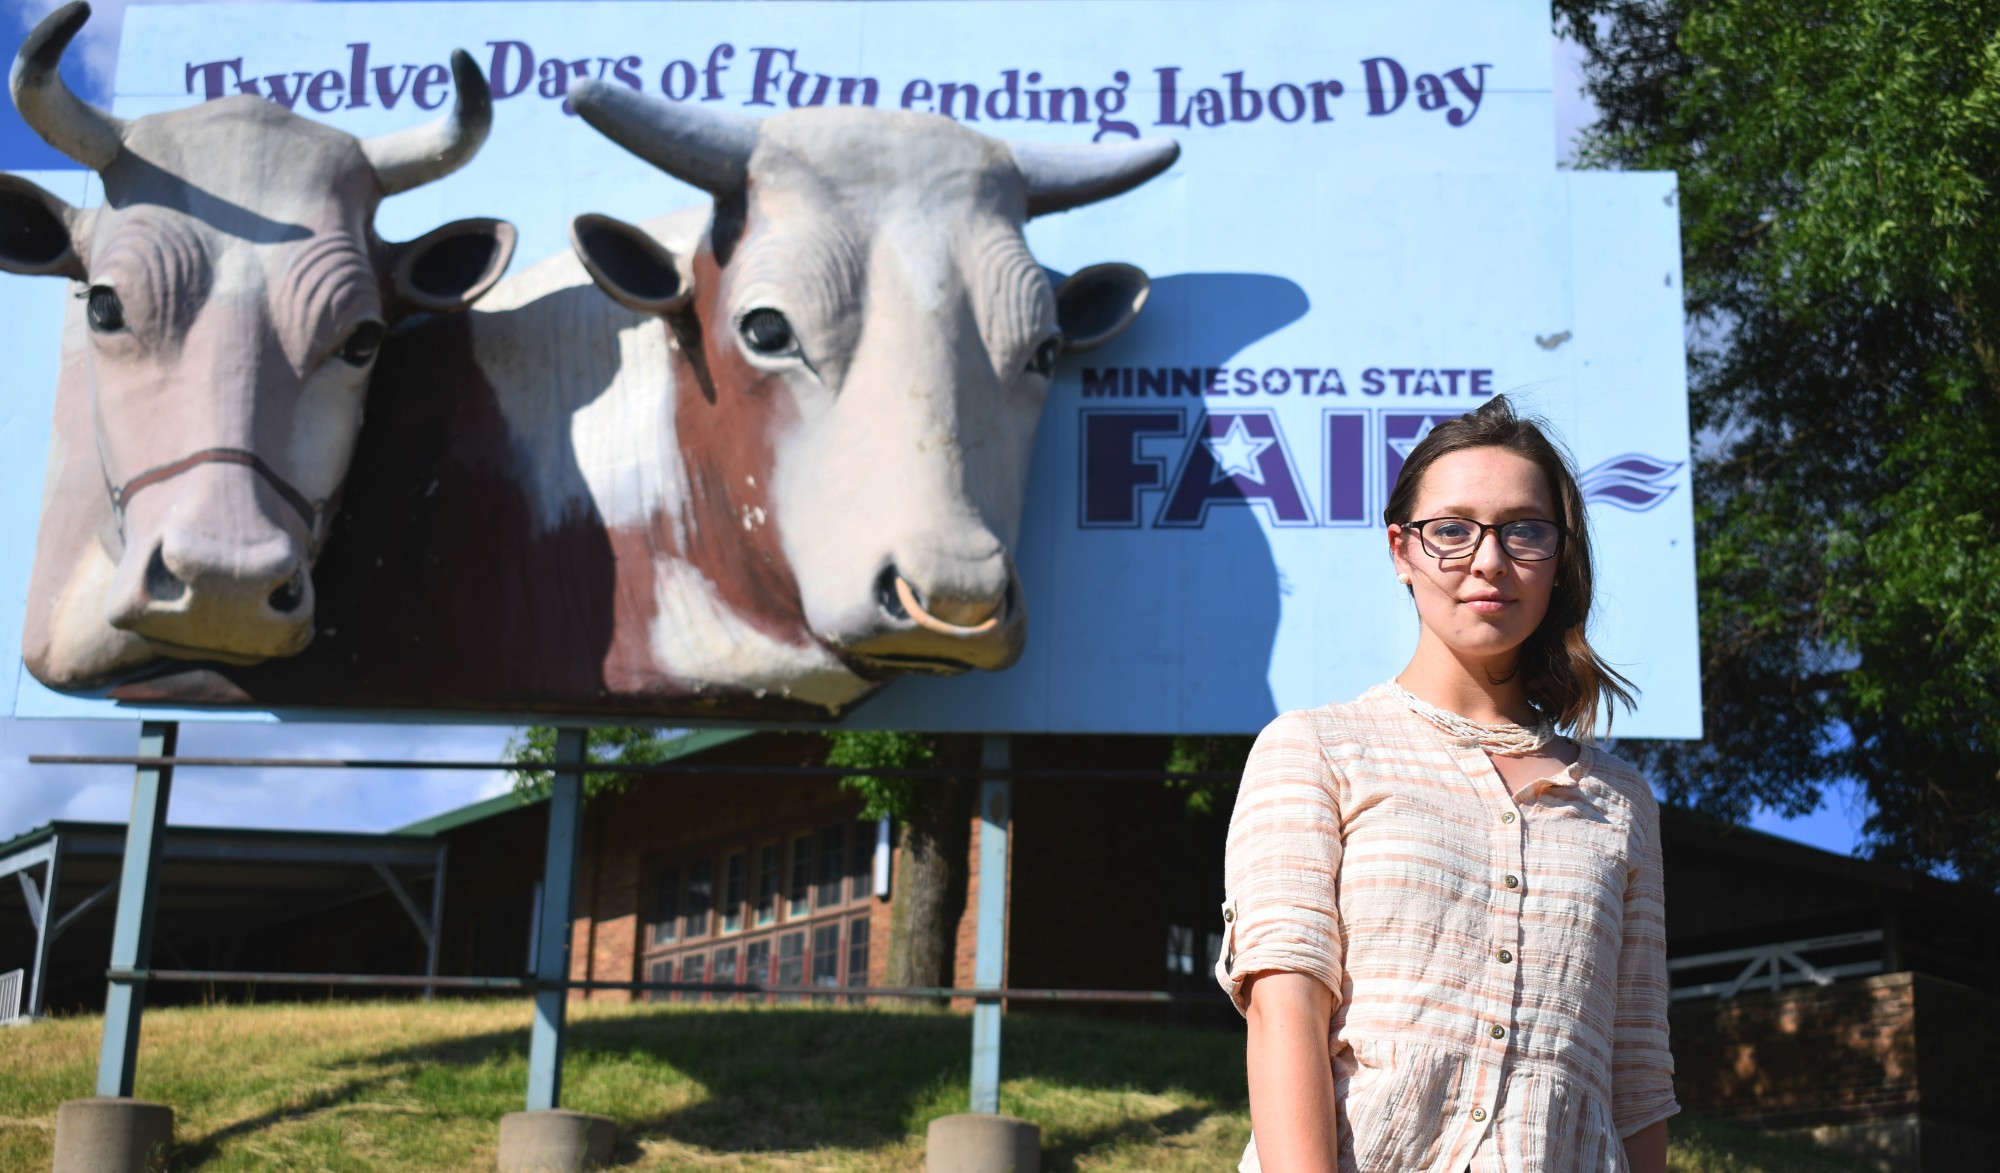 Agriculture communication major Elaine Dorn in the Minnesota State Fairgrounds on Wednesday, June 24. Dorn was planning to show her sheep at this year’s fair before it was canceled due to COVID-19.